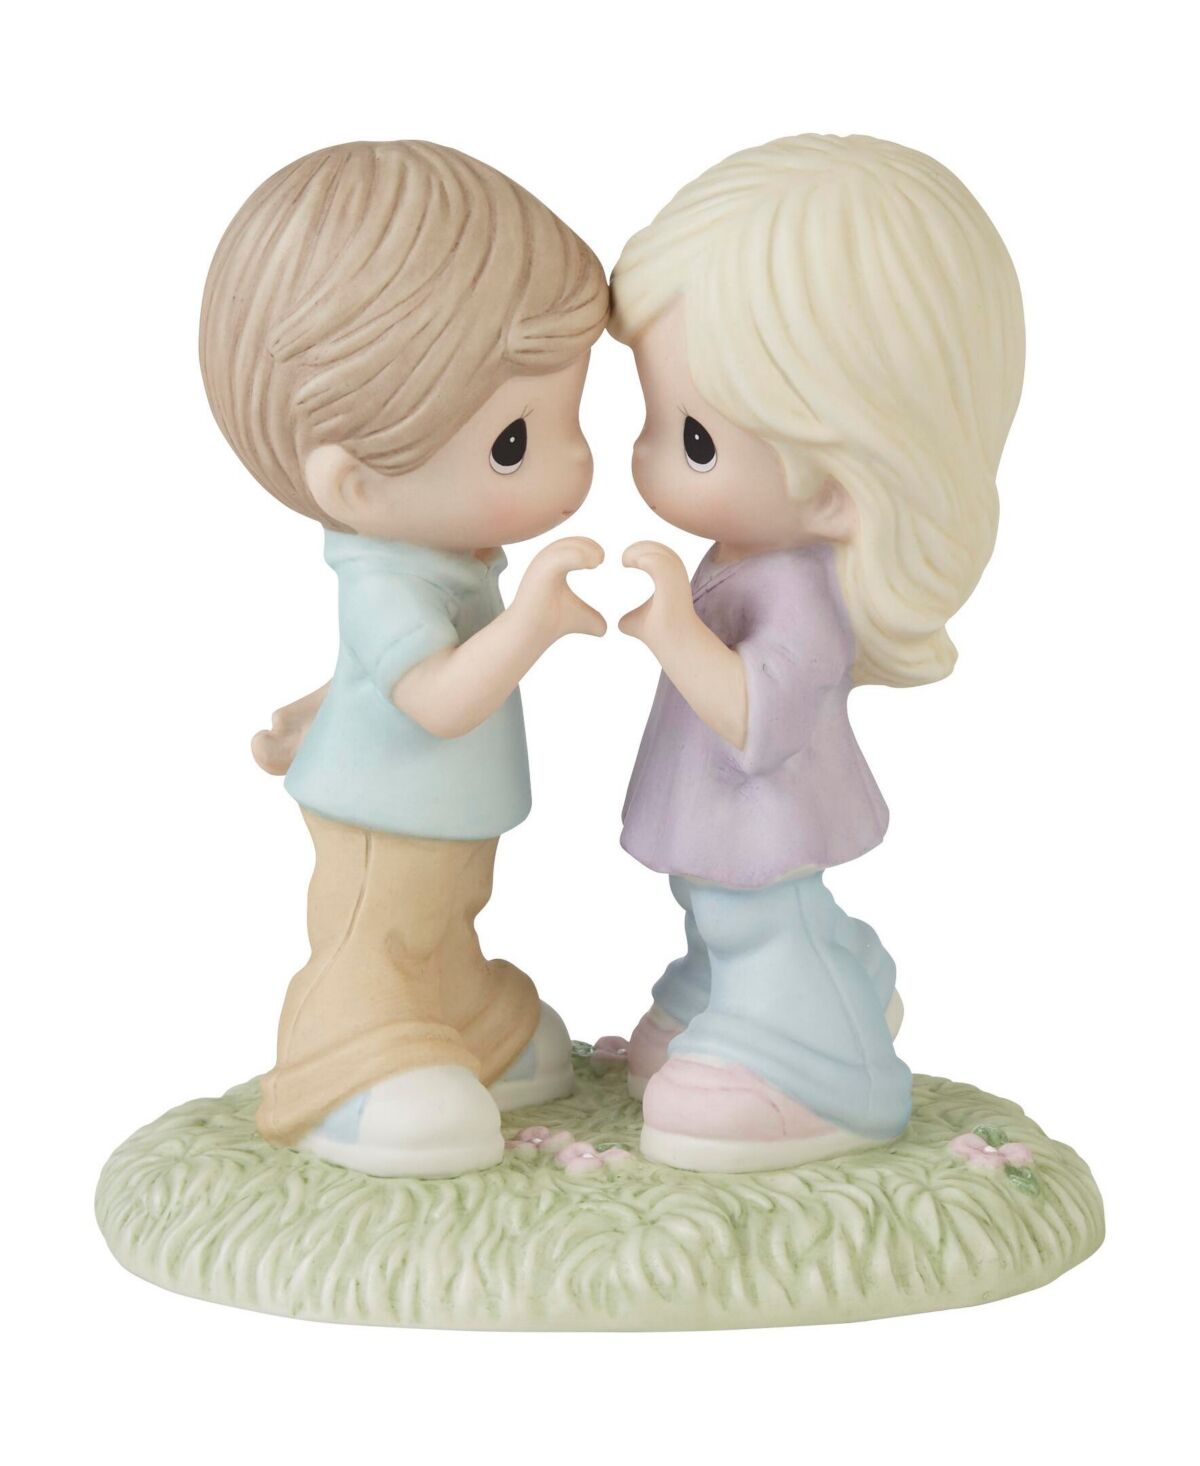 Precious Moments Love Will Keep Us Together Bisque Porcelain Figurine - Multicolored